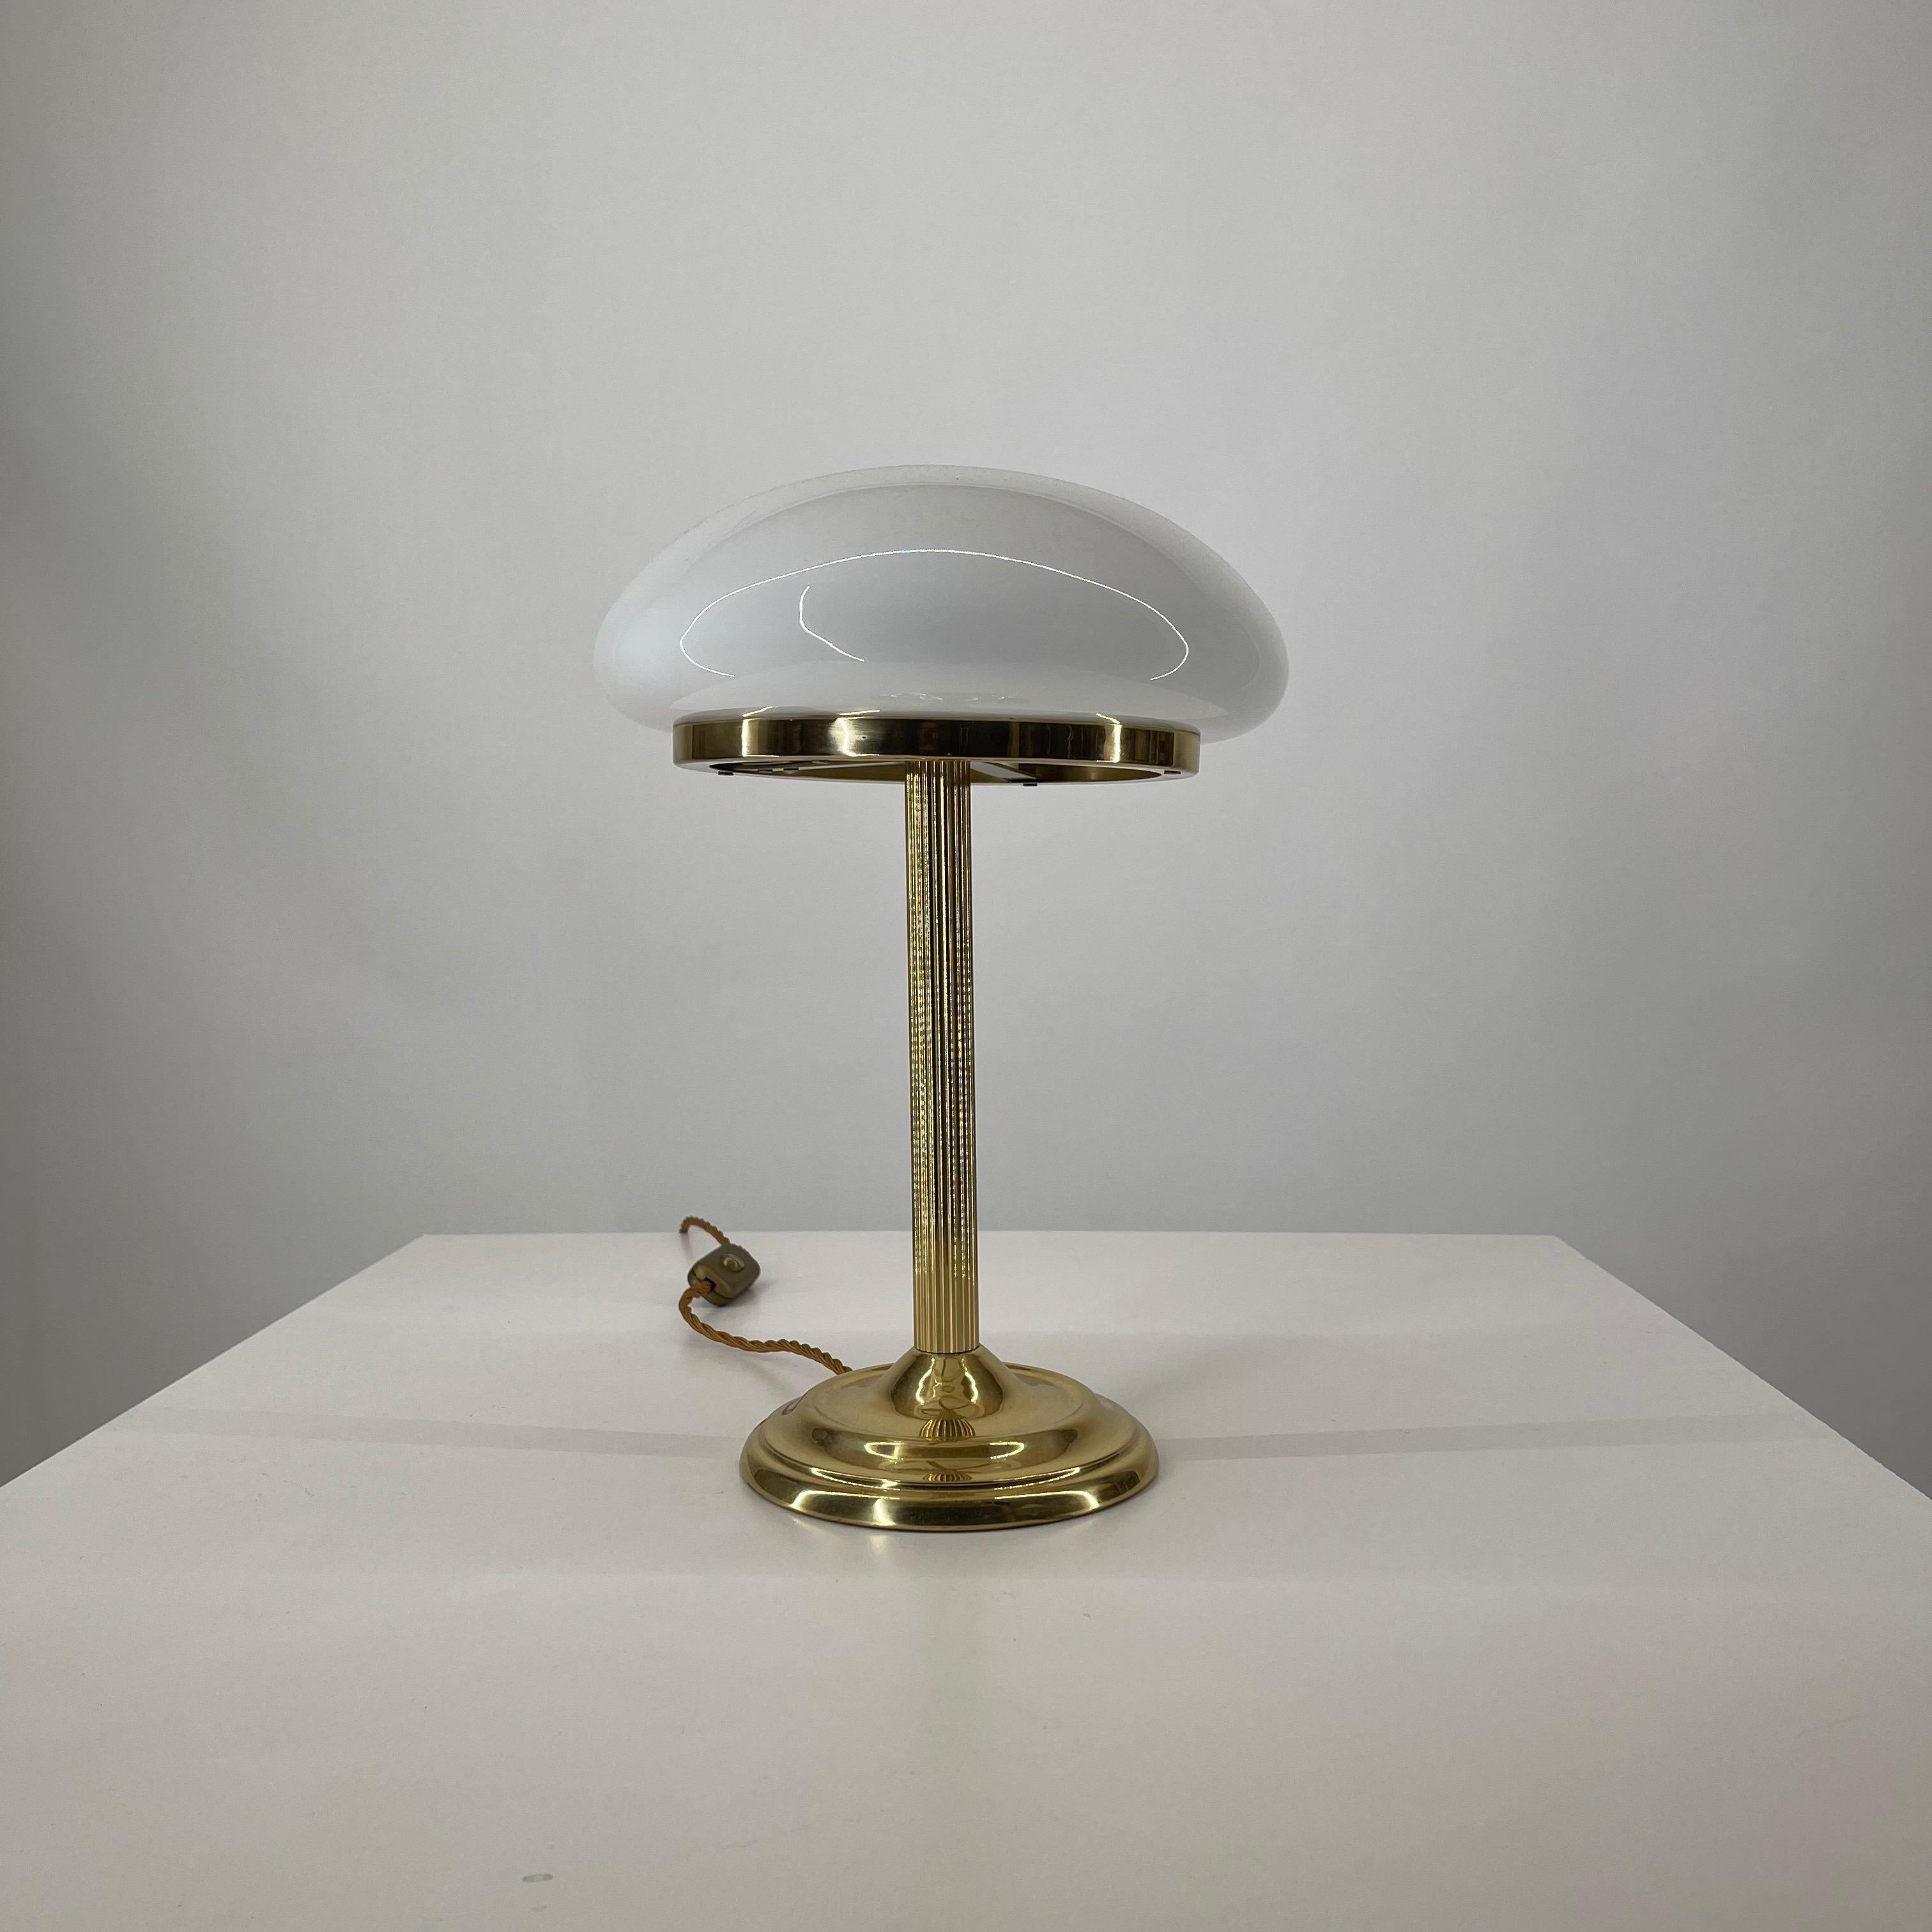 Art Deco brass table lampe, Austria 1970s. Rewired with cloth cable.